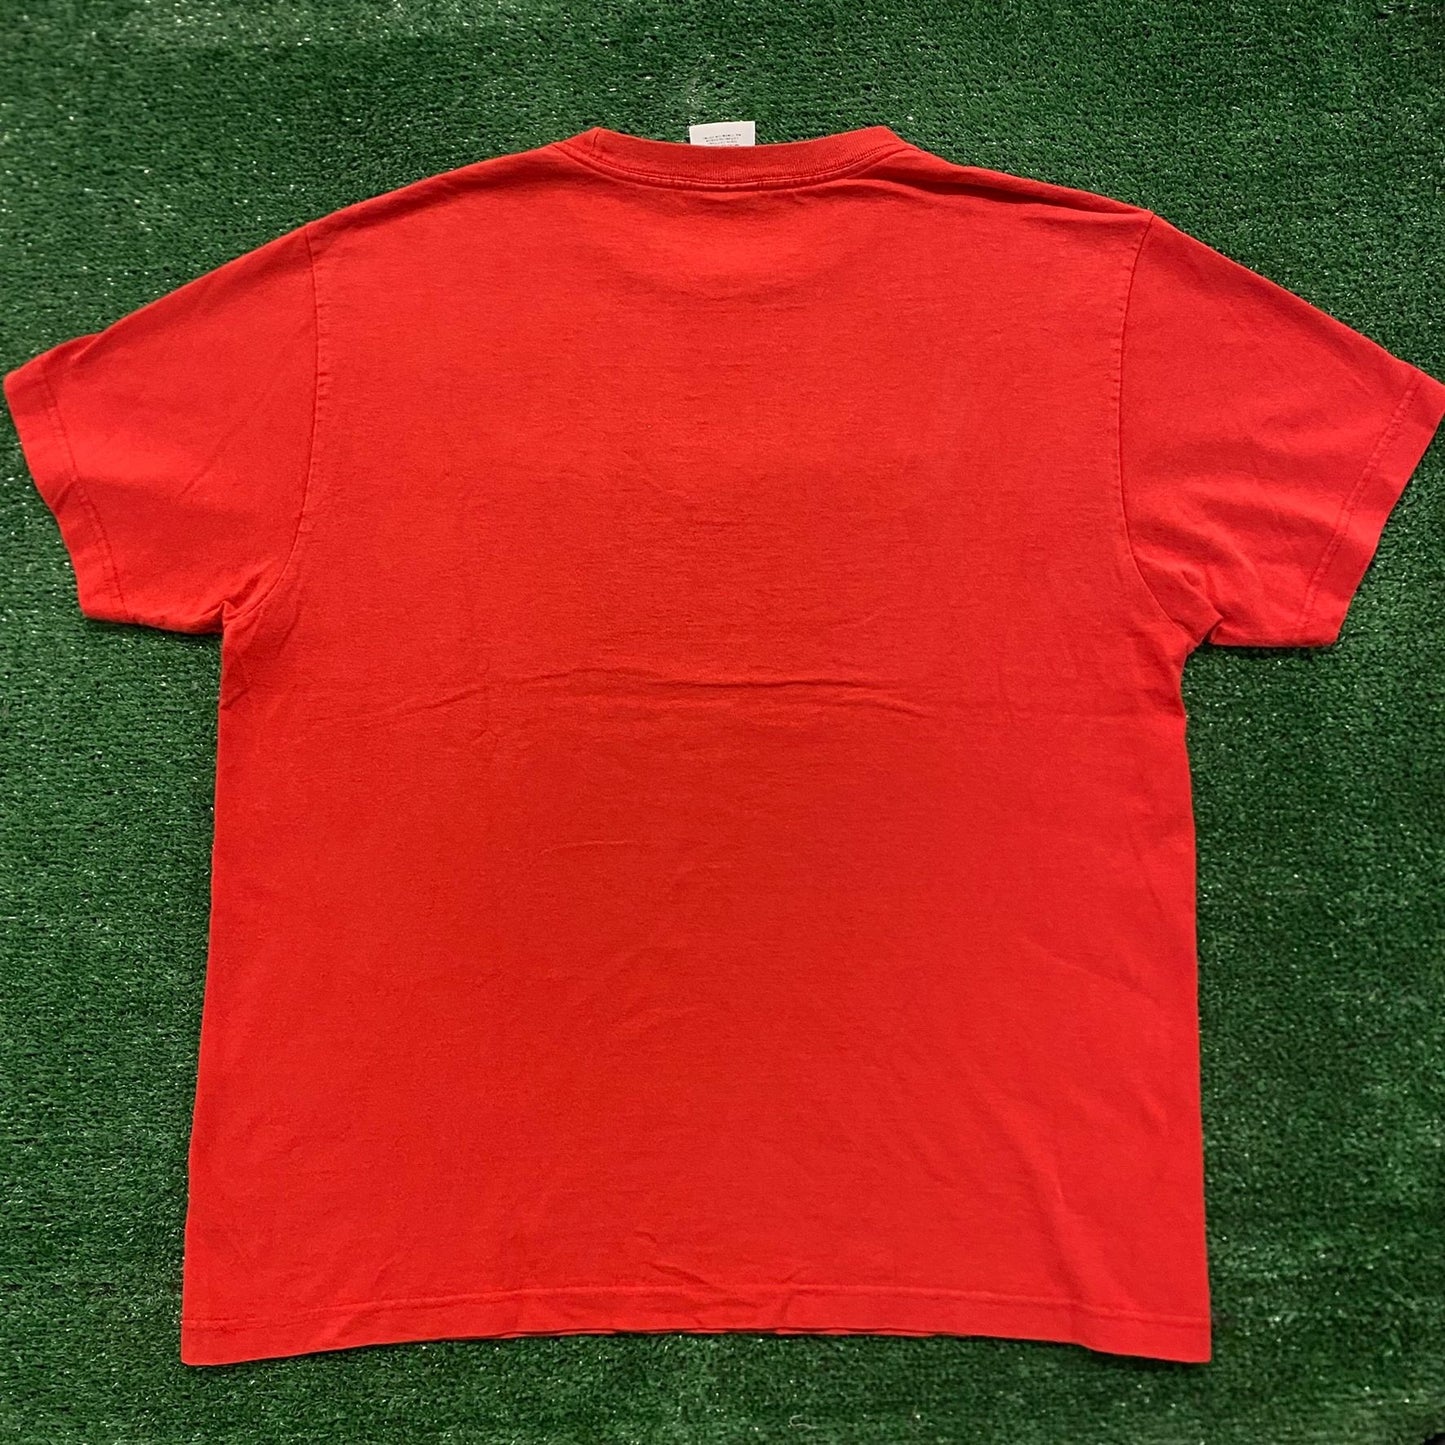 Vintage 90s Tommy Hilfiger Denim Essential Spell Out Tee